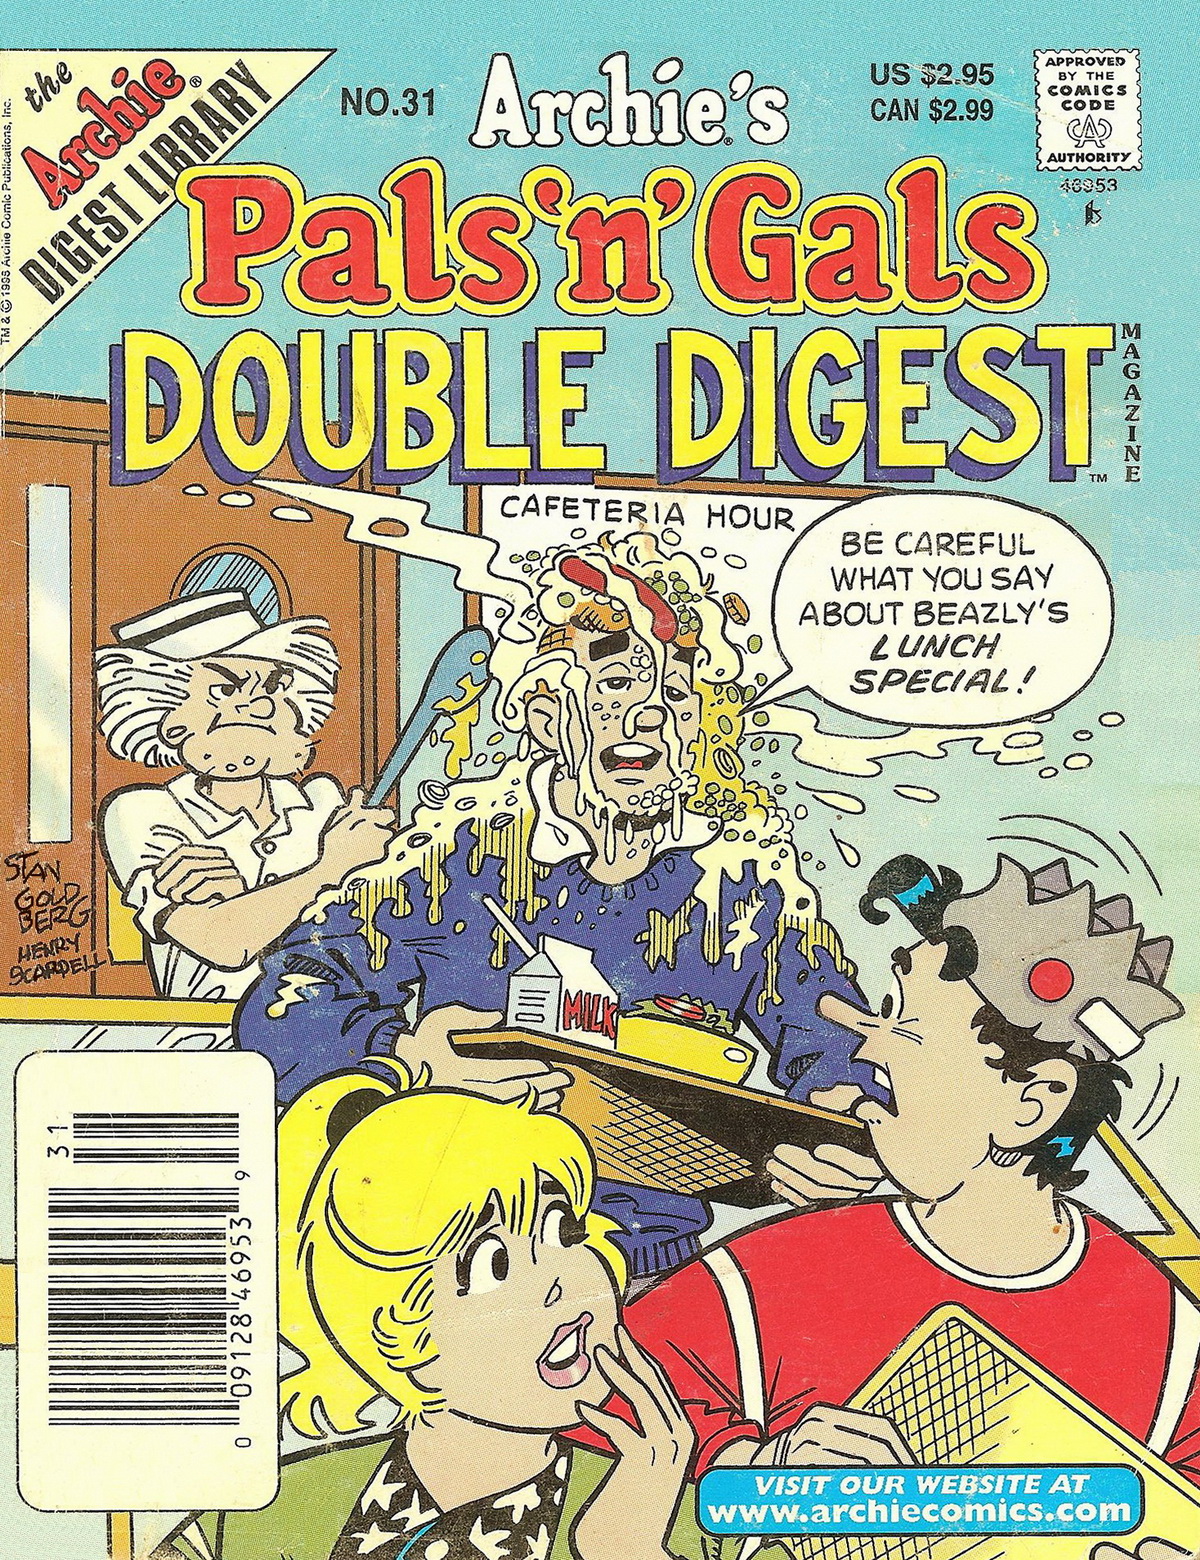 Archie's Pals 'n' Gals Double Digest Magazine issue 31 - Page 1